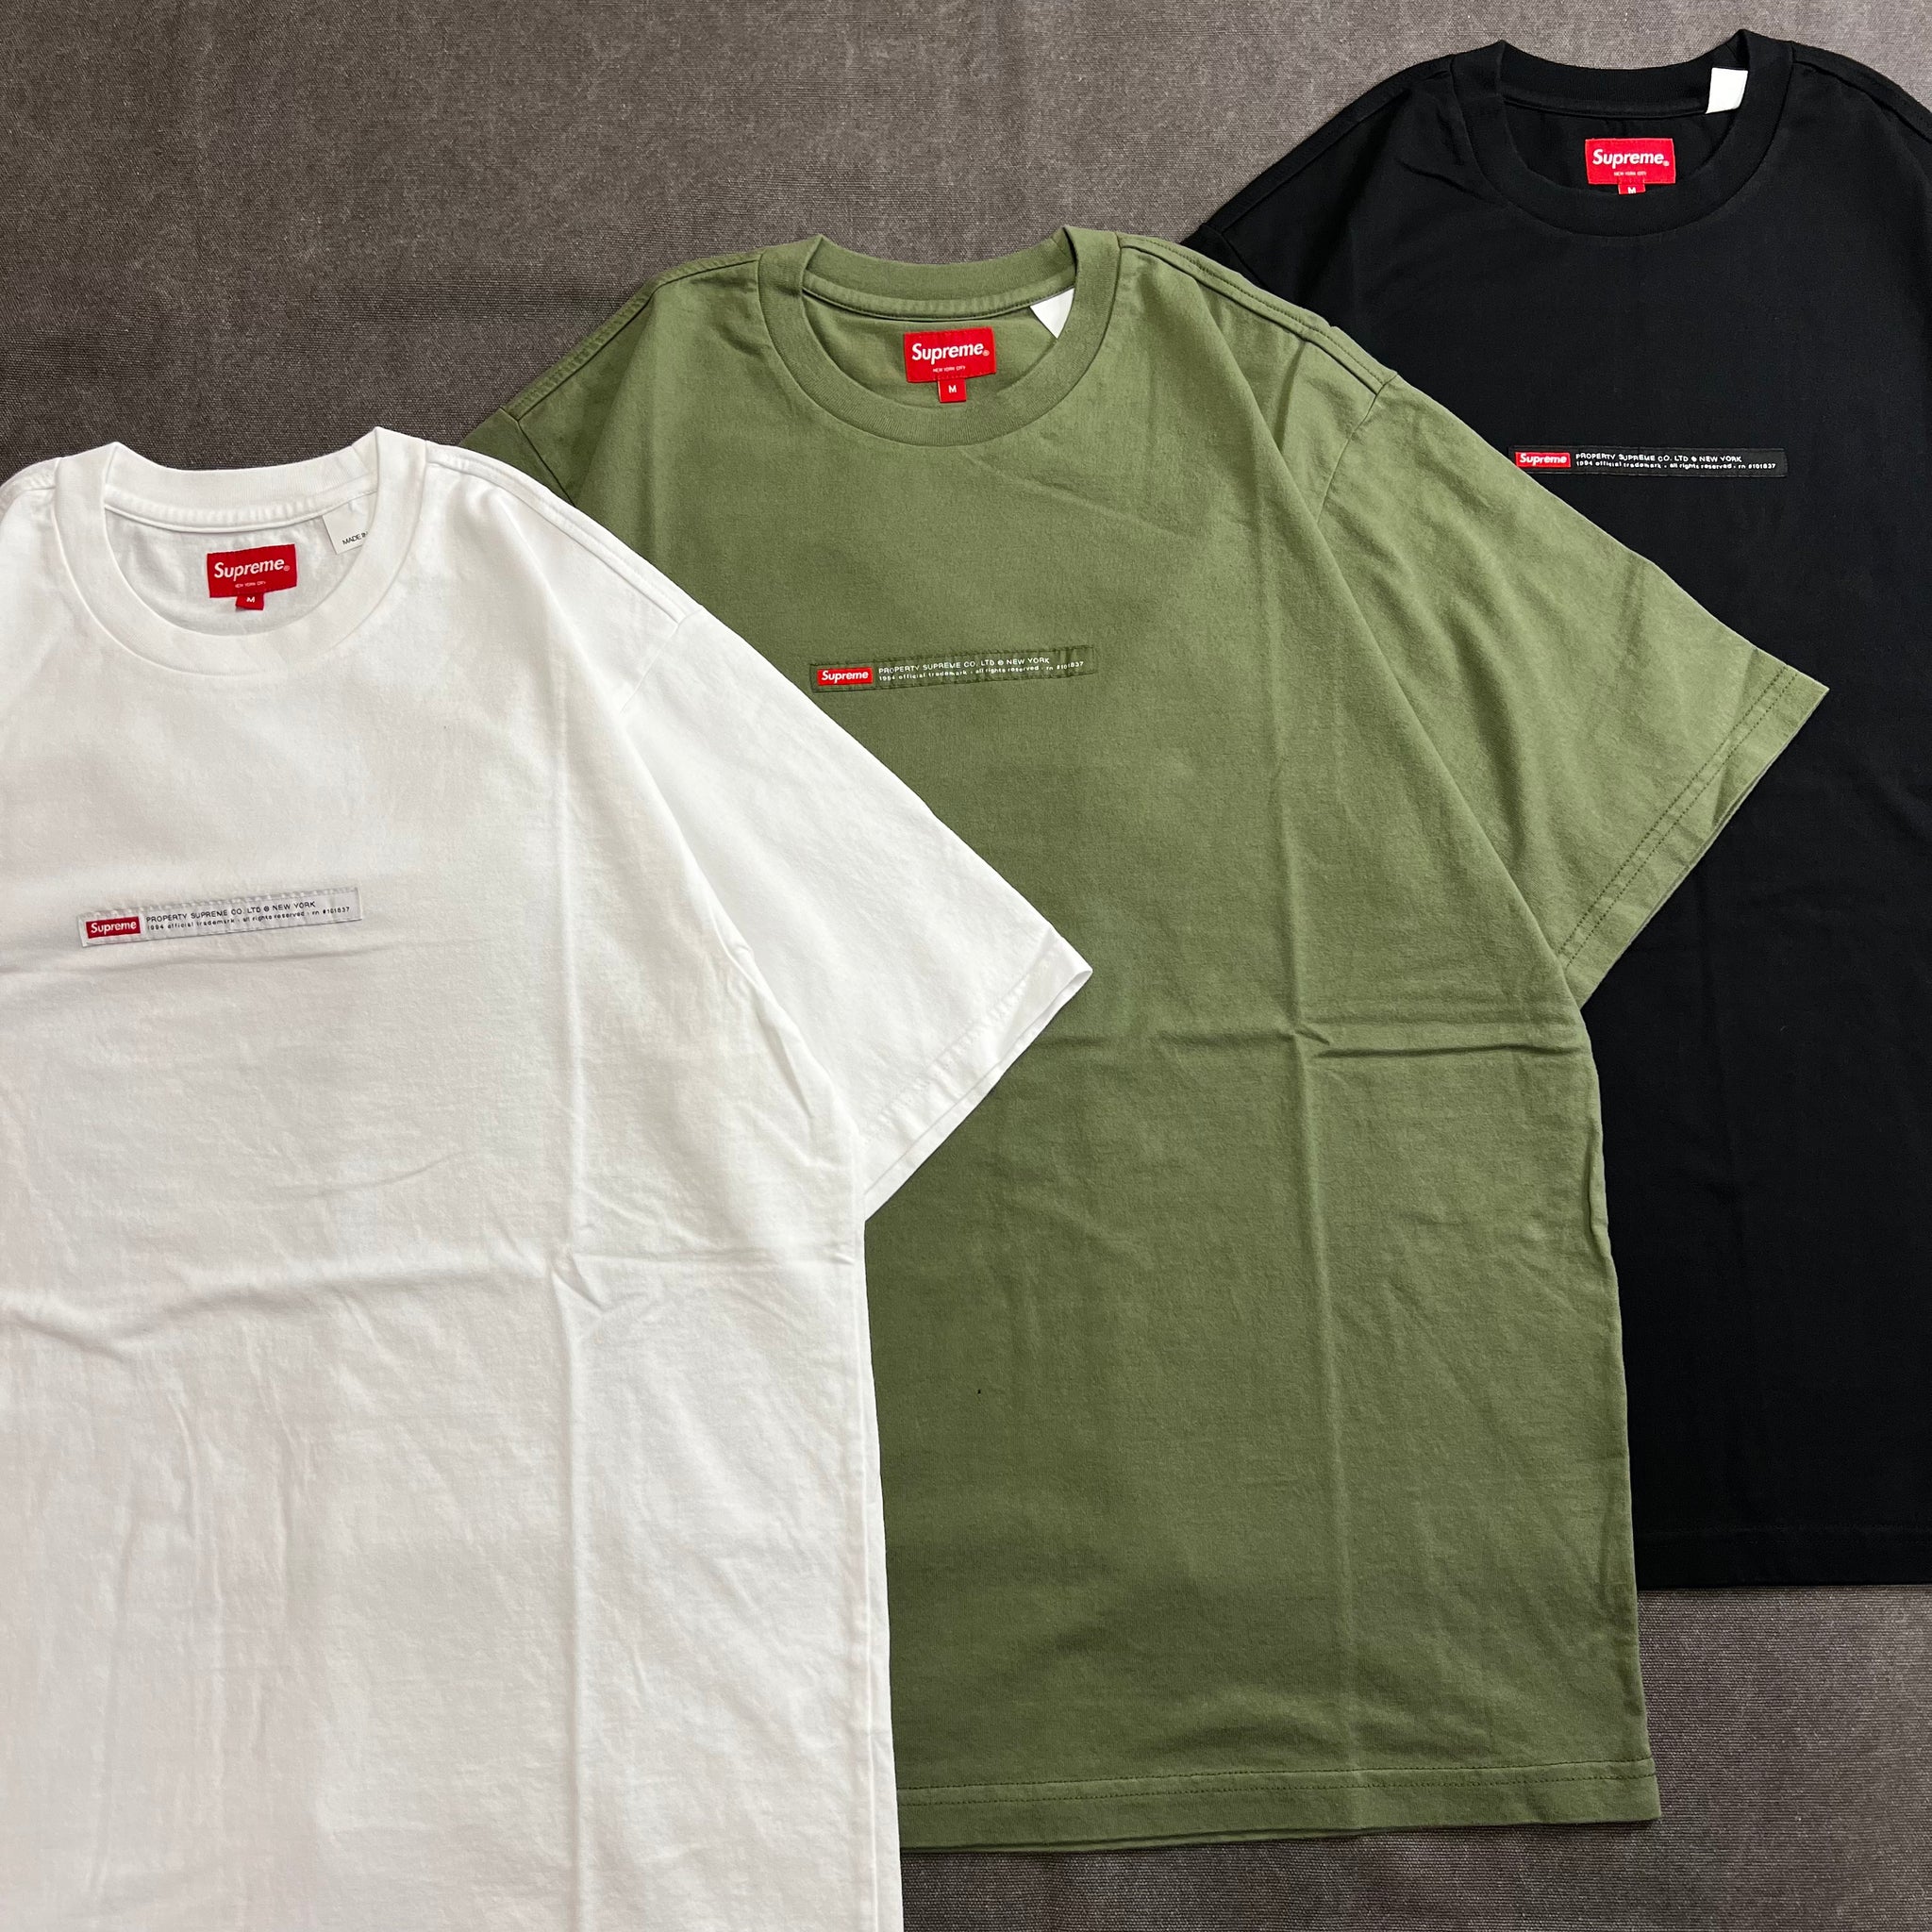 L Supreme Property Label S/S Top Tシャツ商品名